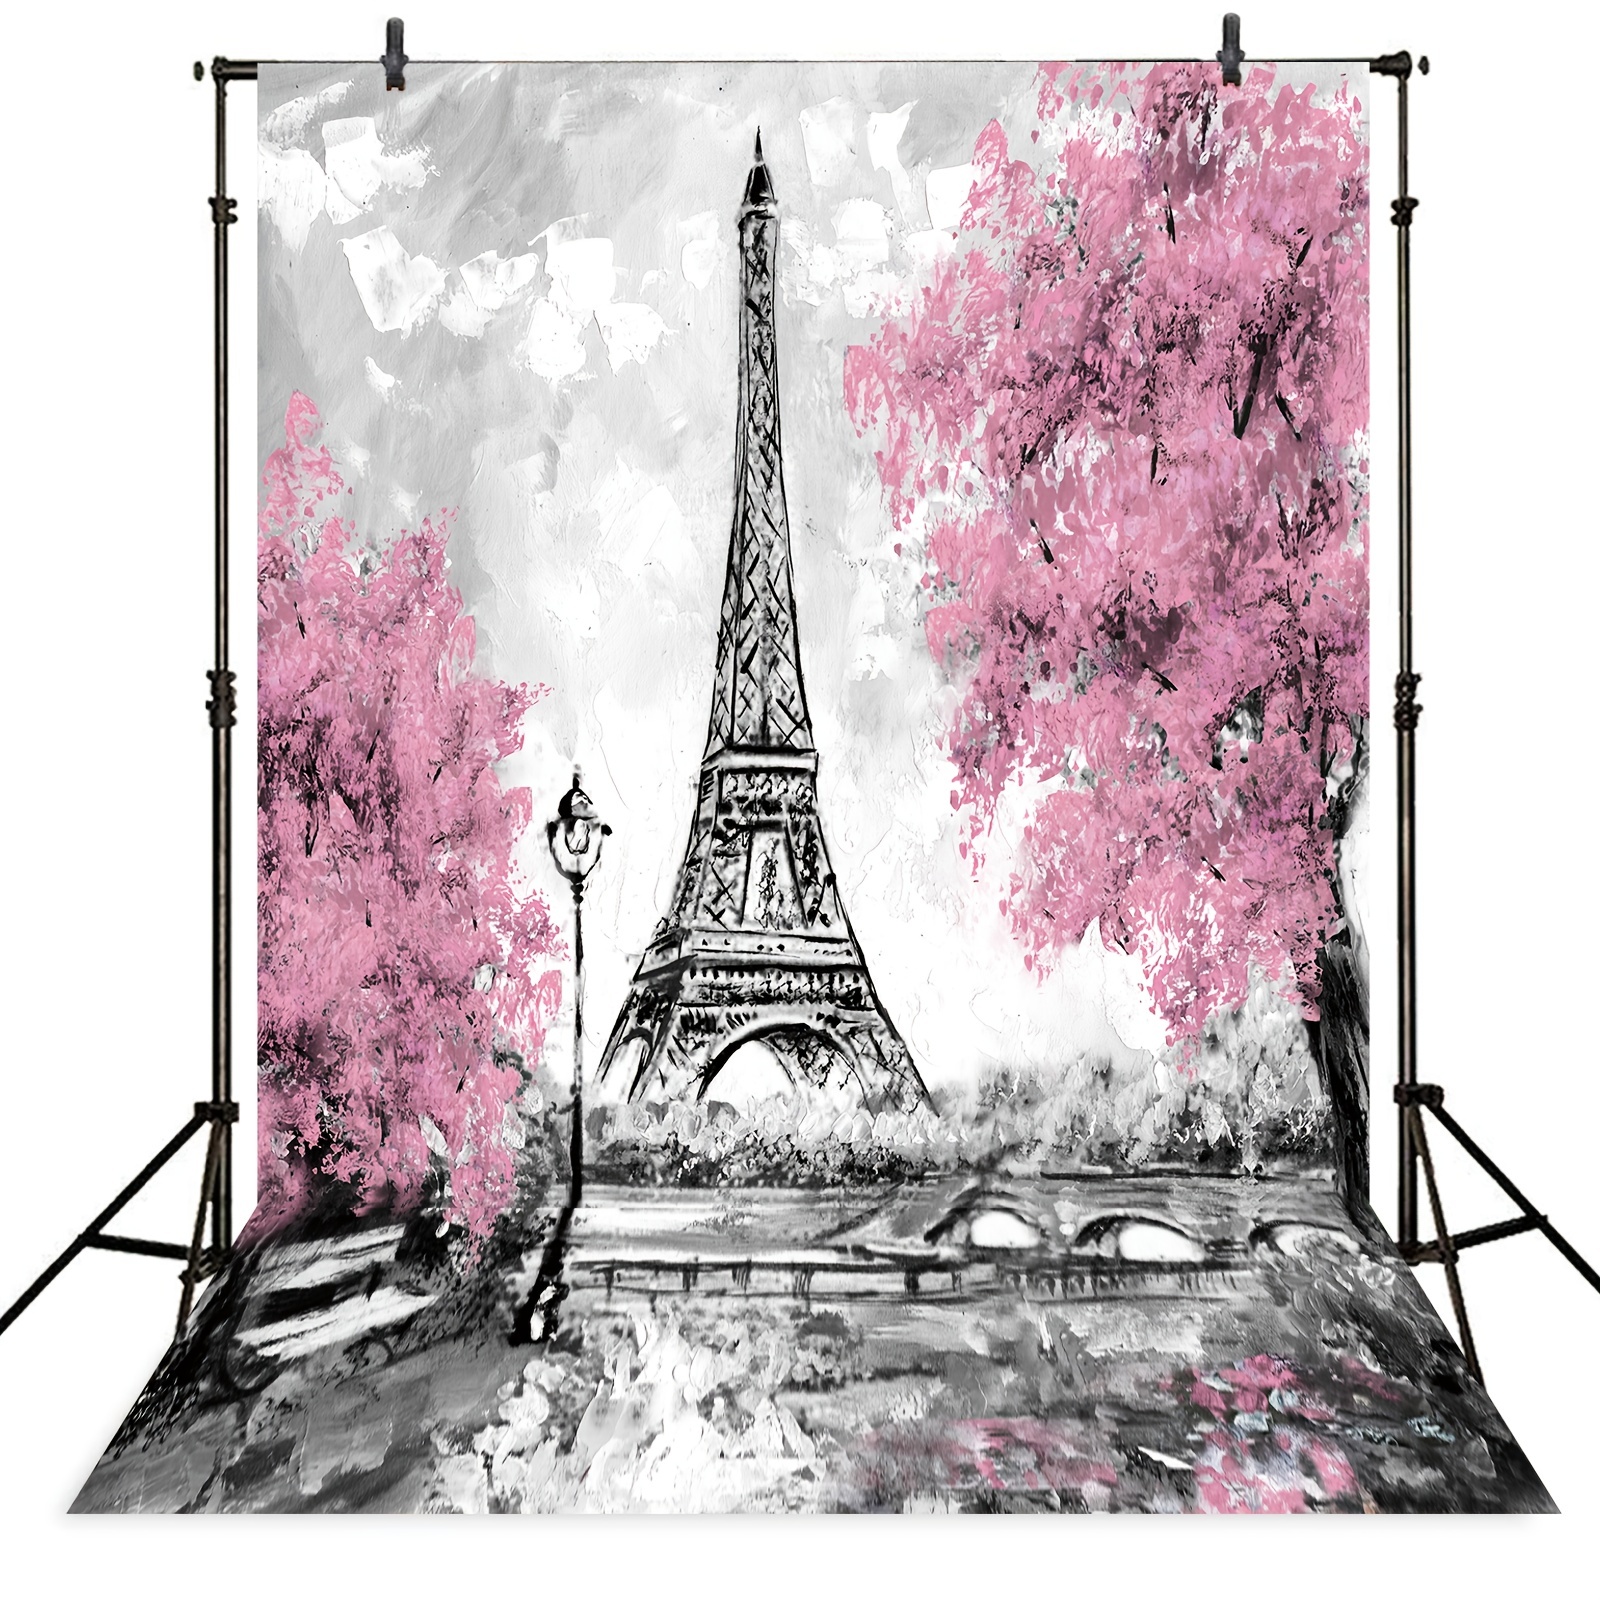  Use4 Take Me To Paris Eiffel Tower Polyester Backpack School  Travel Bag